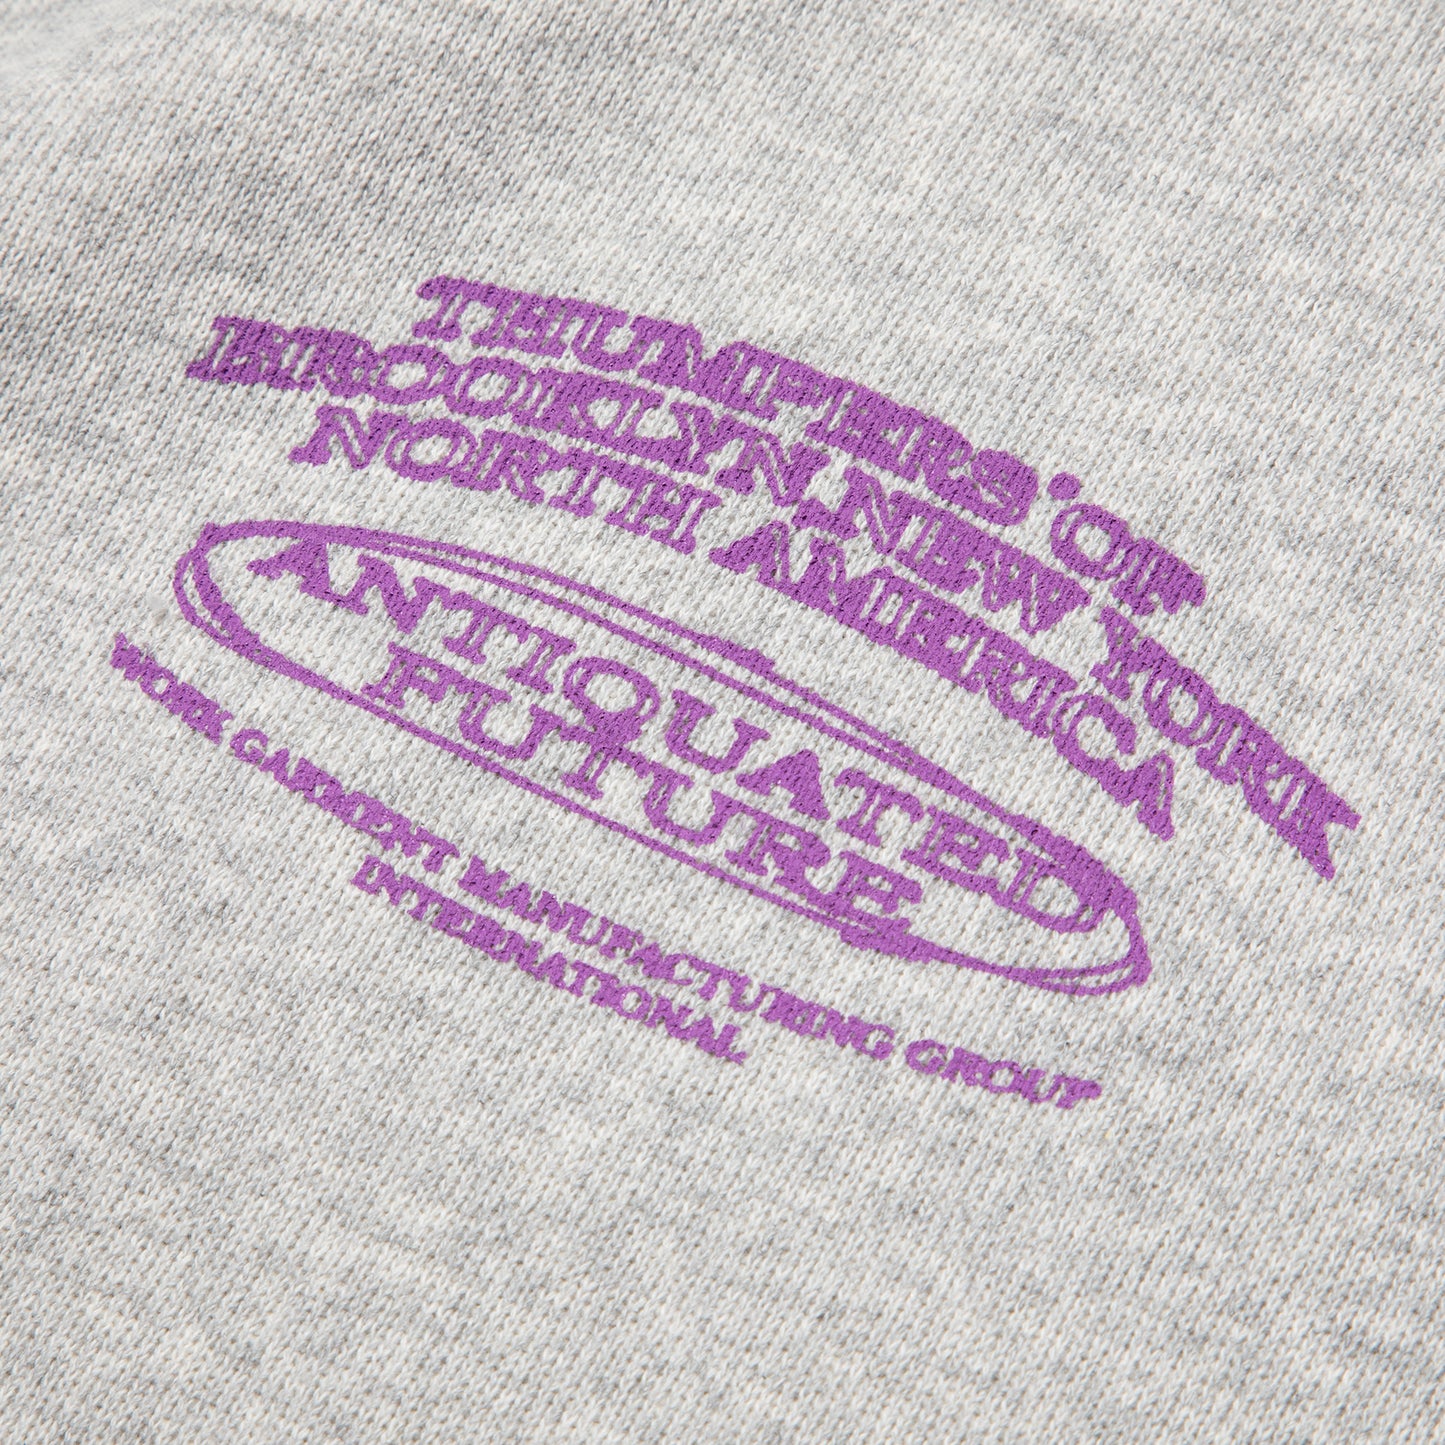 Thumpers Antiquated Future Hoodie (Gray)